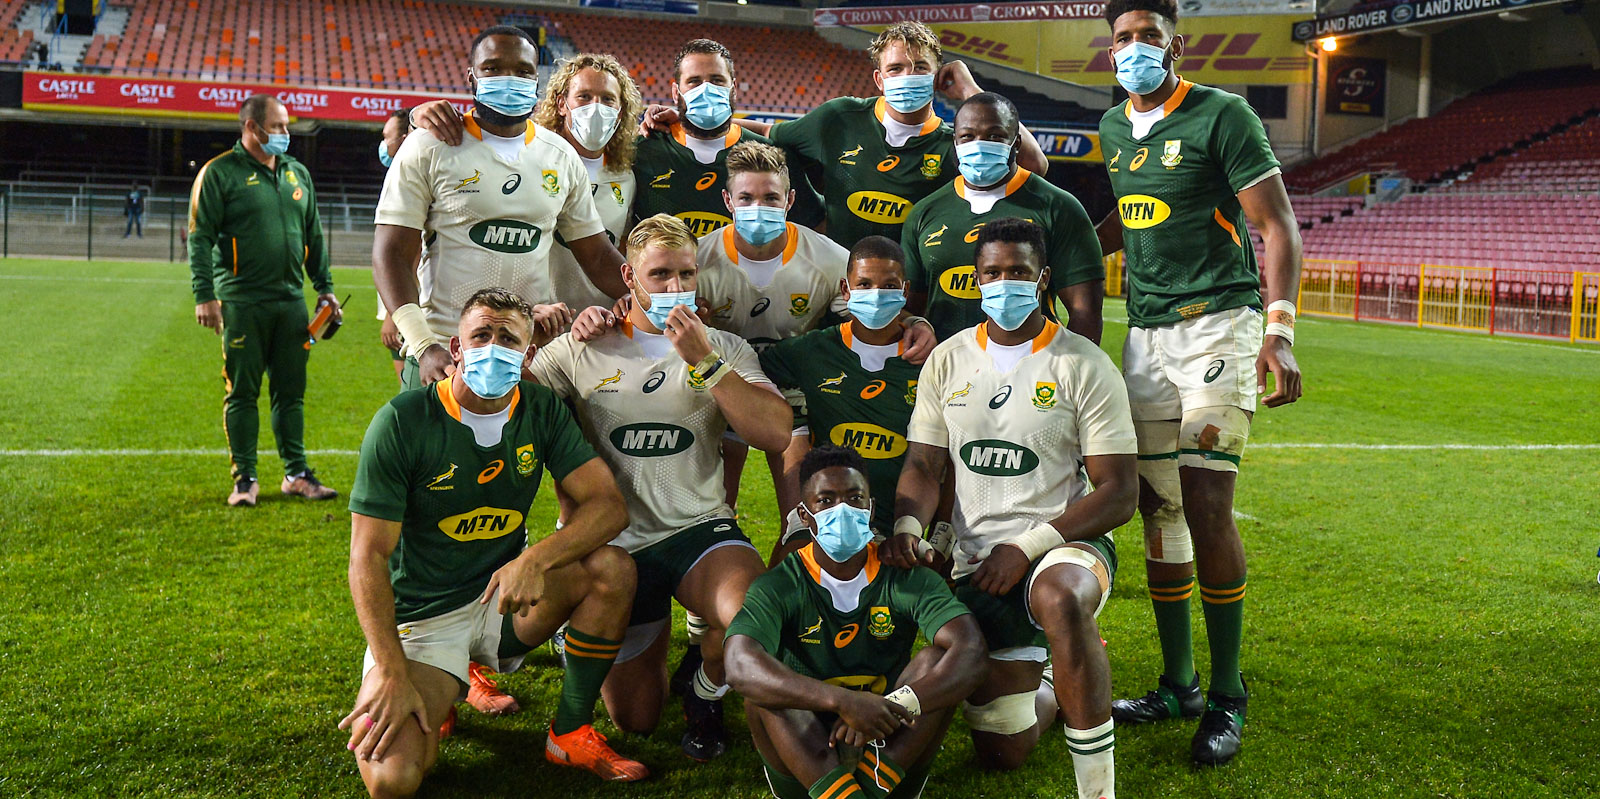 The Castle Lager Springbok Showdown was the closest the Boks came to any form of match action in 2020.